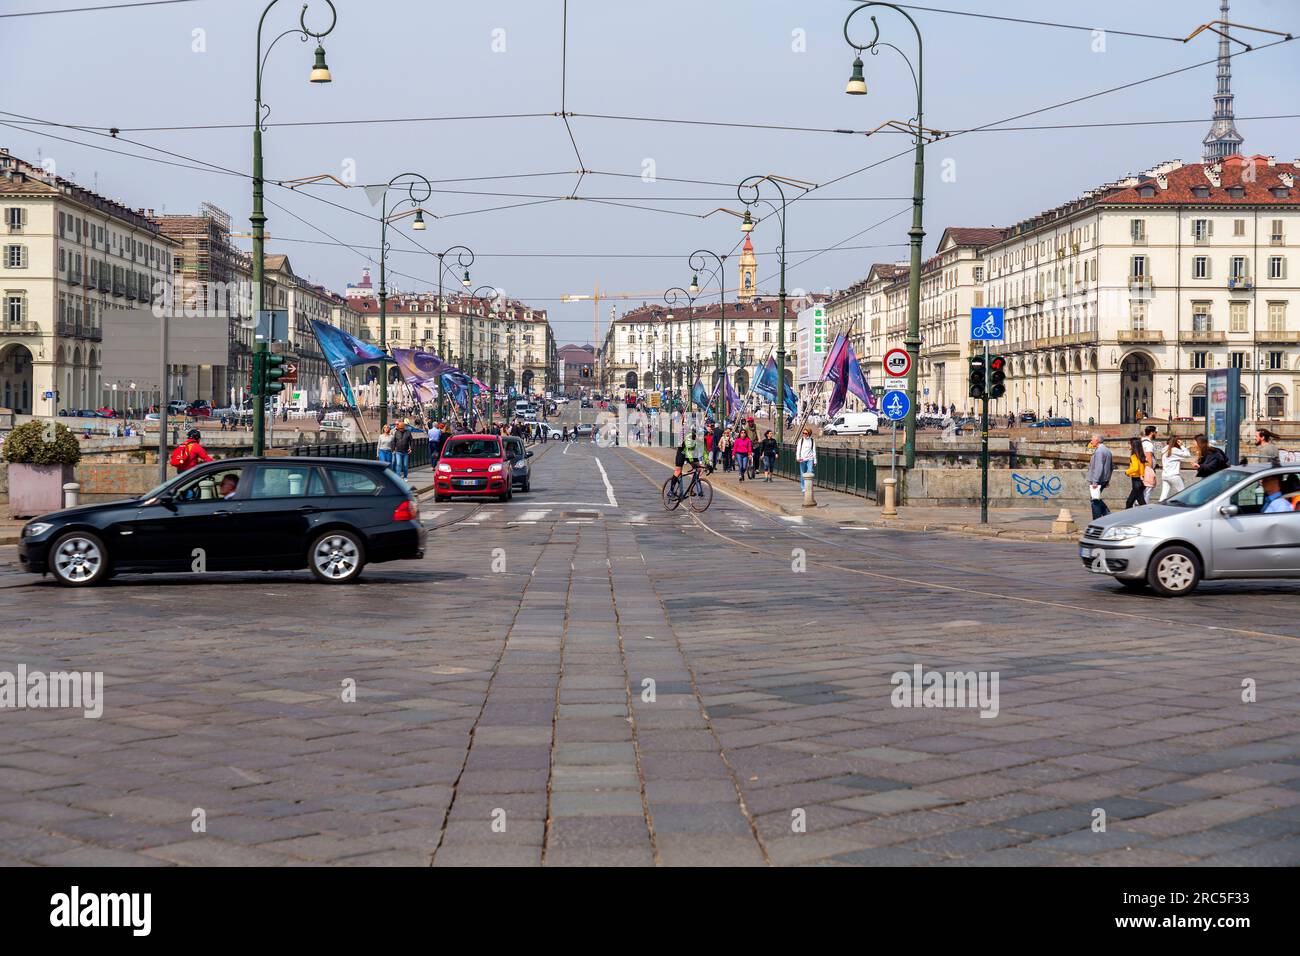 Turin, Italy - March 27, 2022: Piazza Vittorio Veneto, also known as Piazza Vittorio, is a city square in Turin, Italy, which takes its name from the Stock Photo